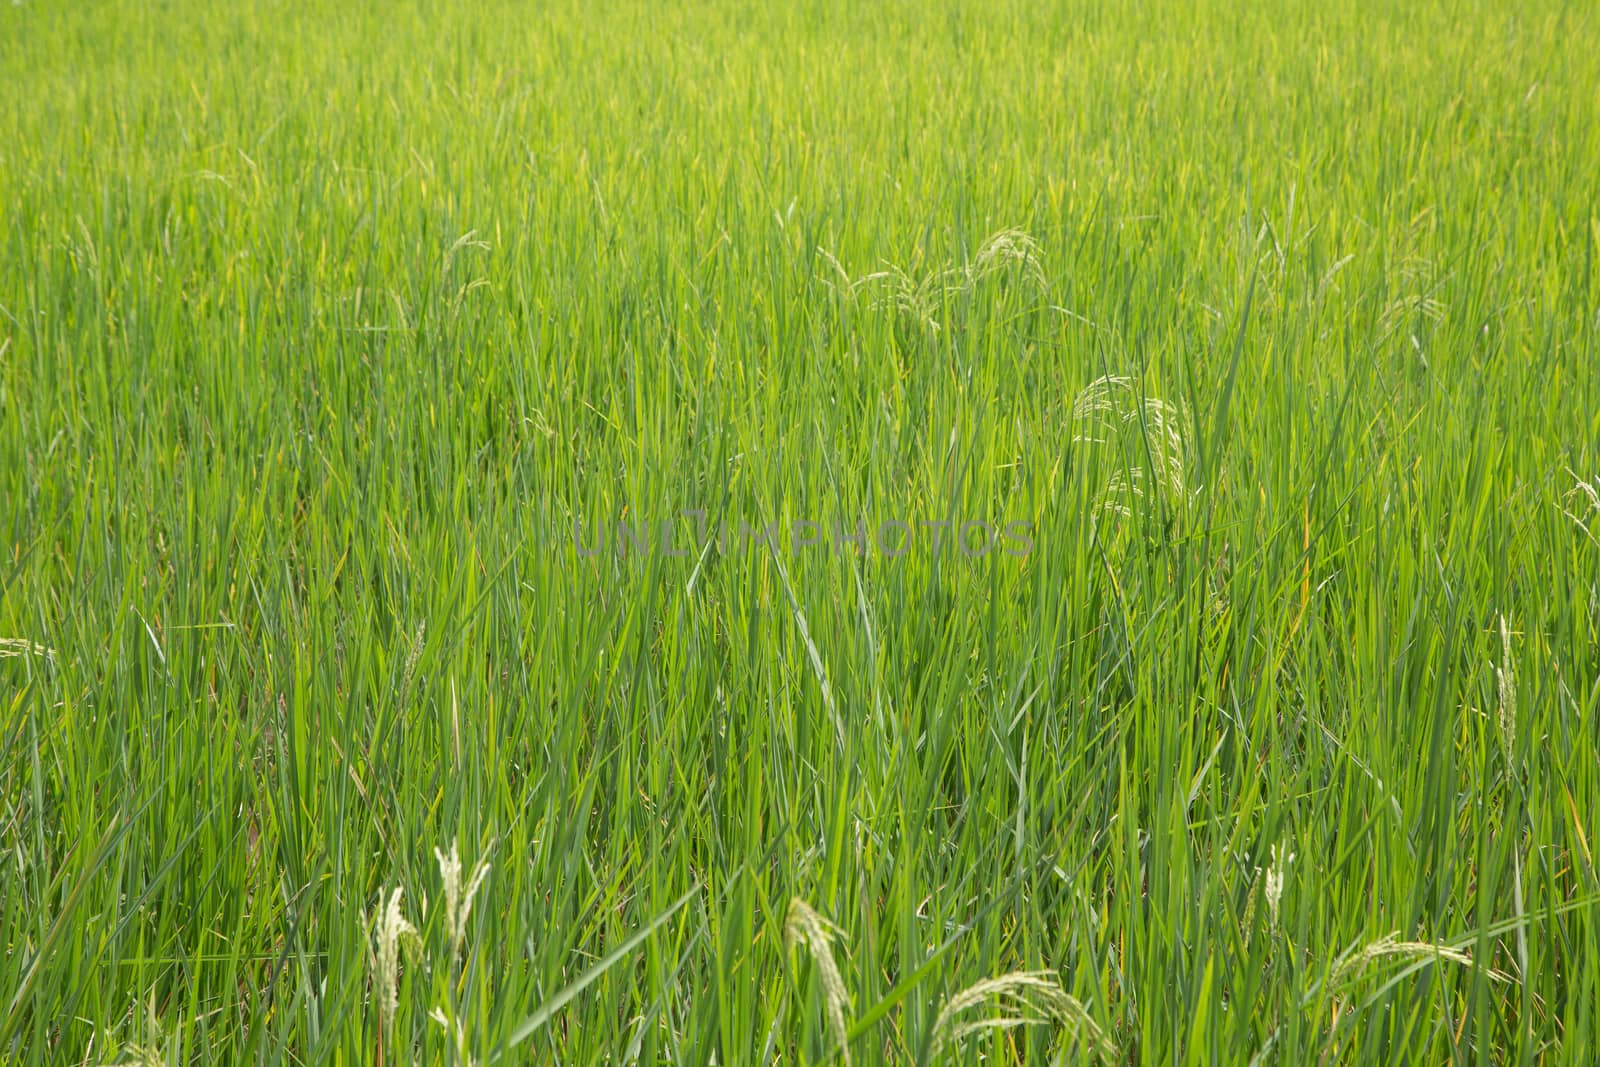 Green Rice Field - rice is the main food for asian country